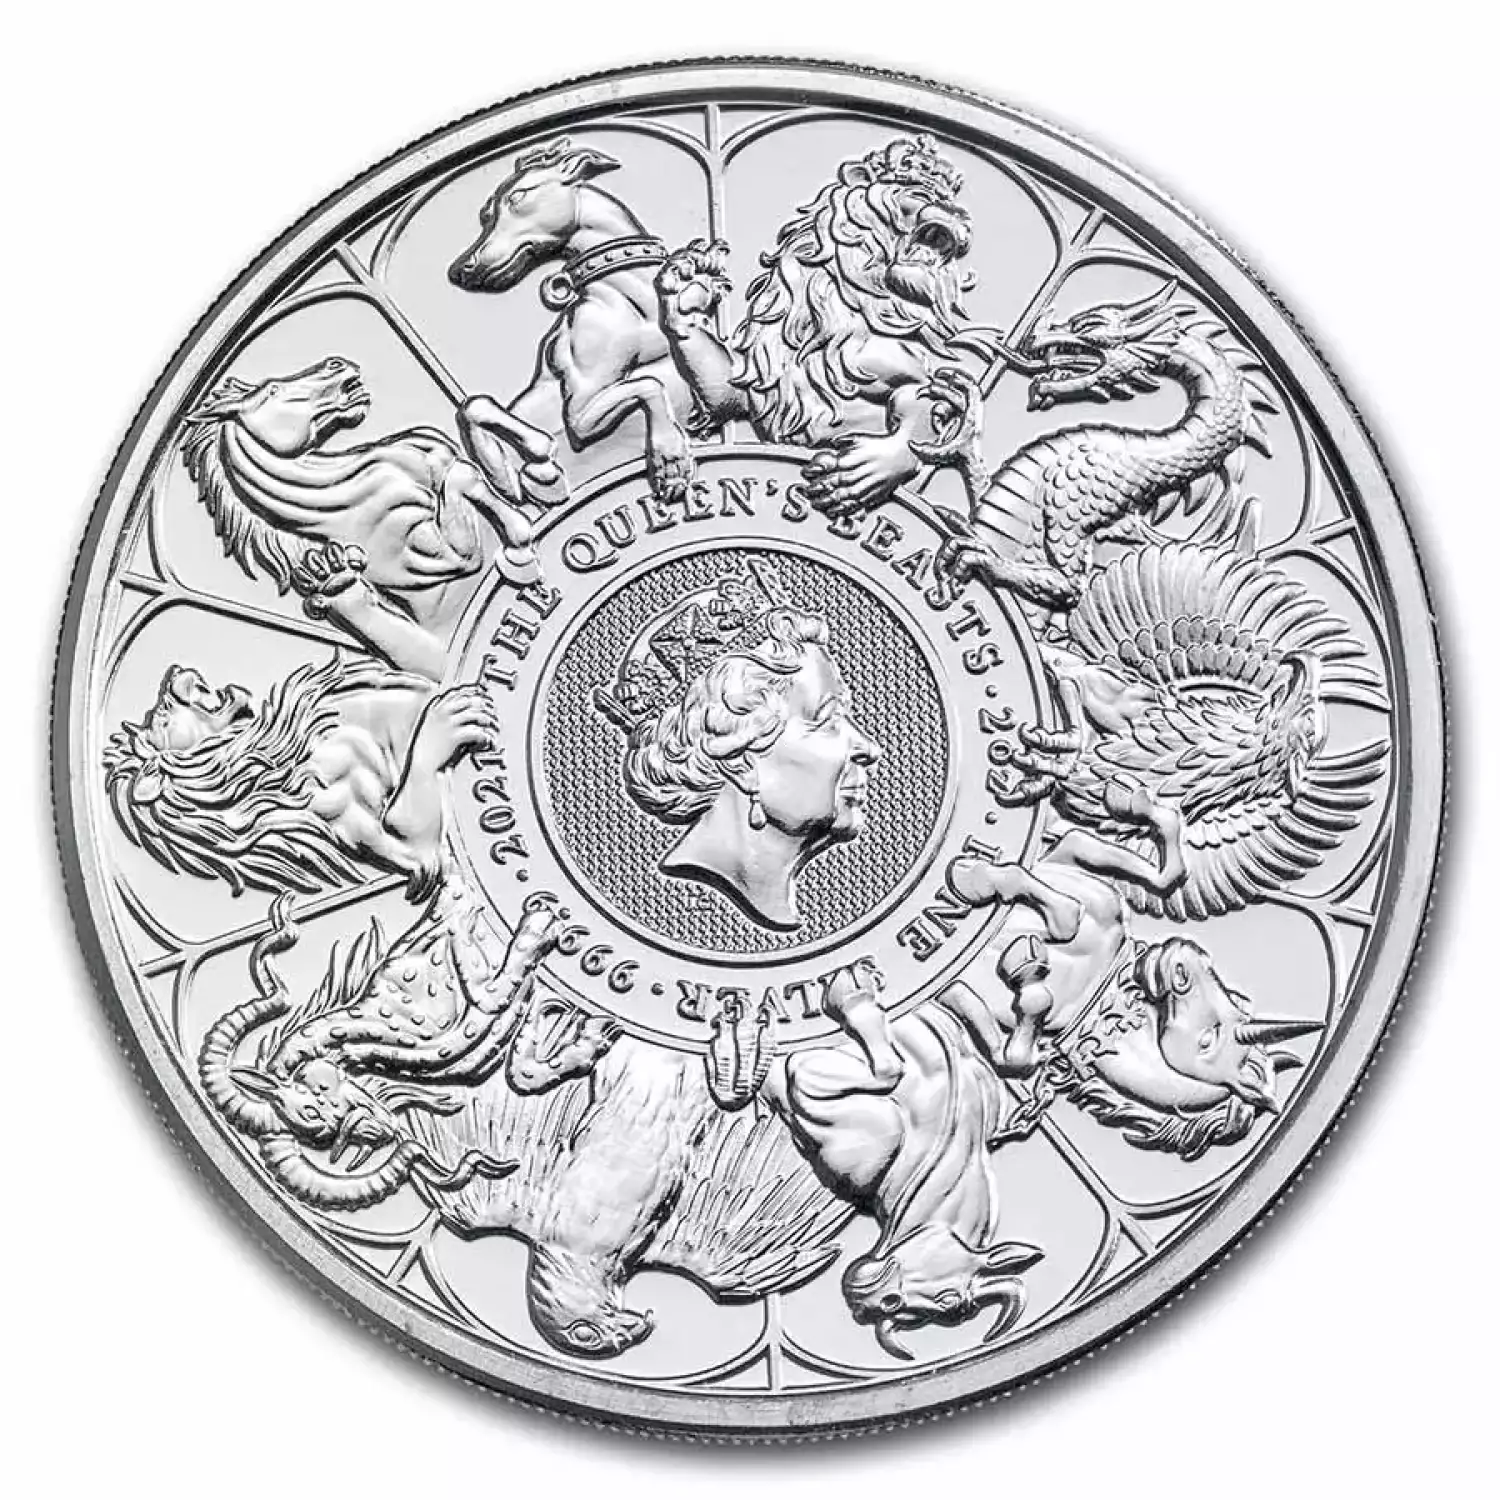 2021 Queens Beasts 2 oz Compleater silver coin (1)